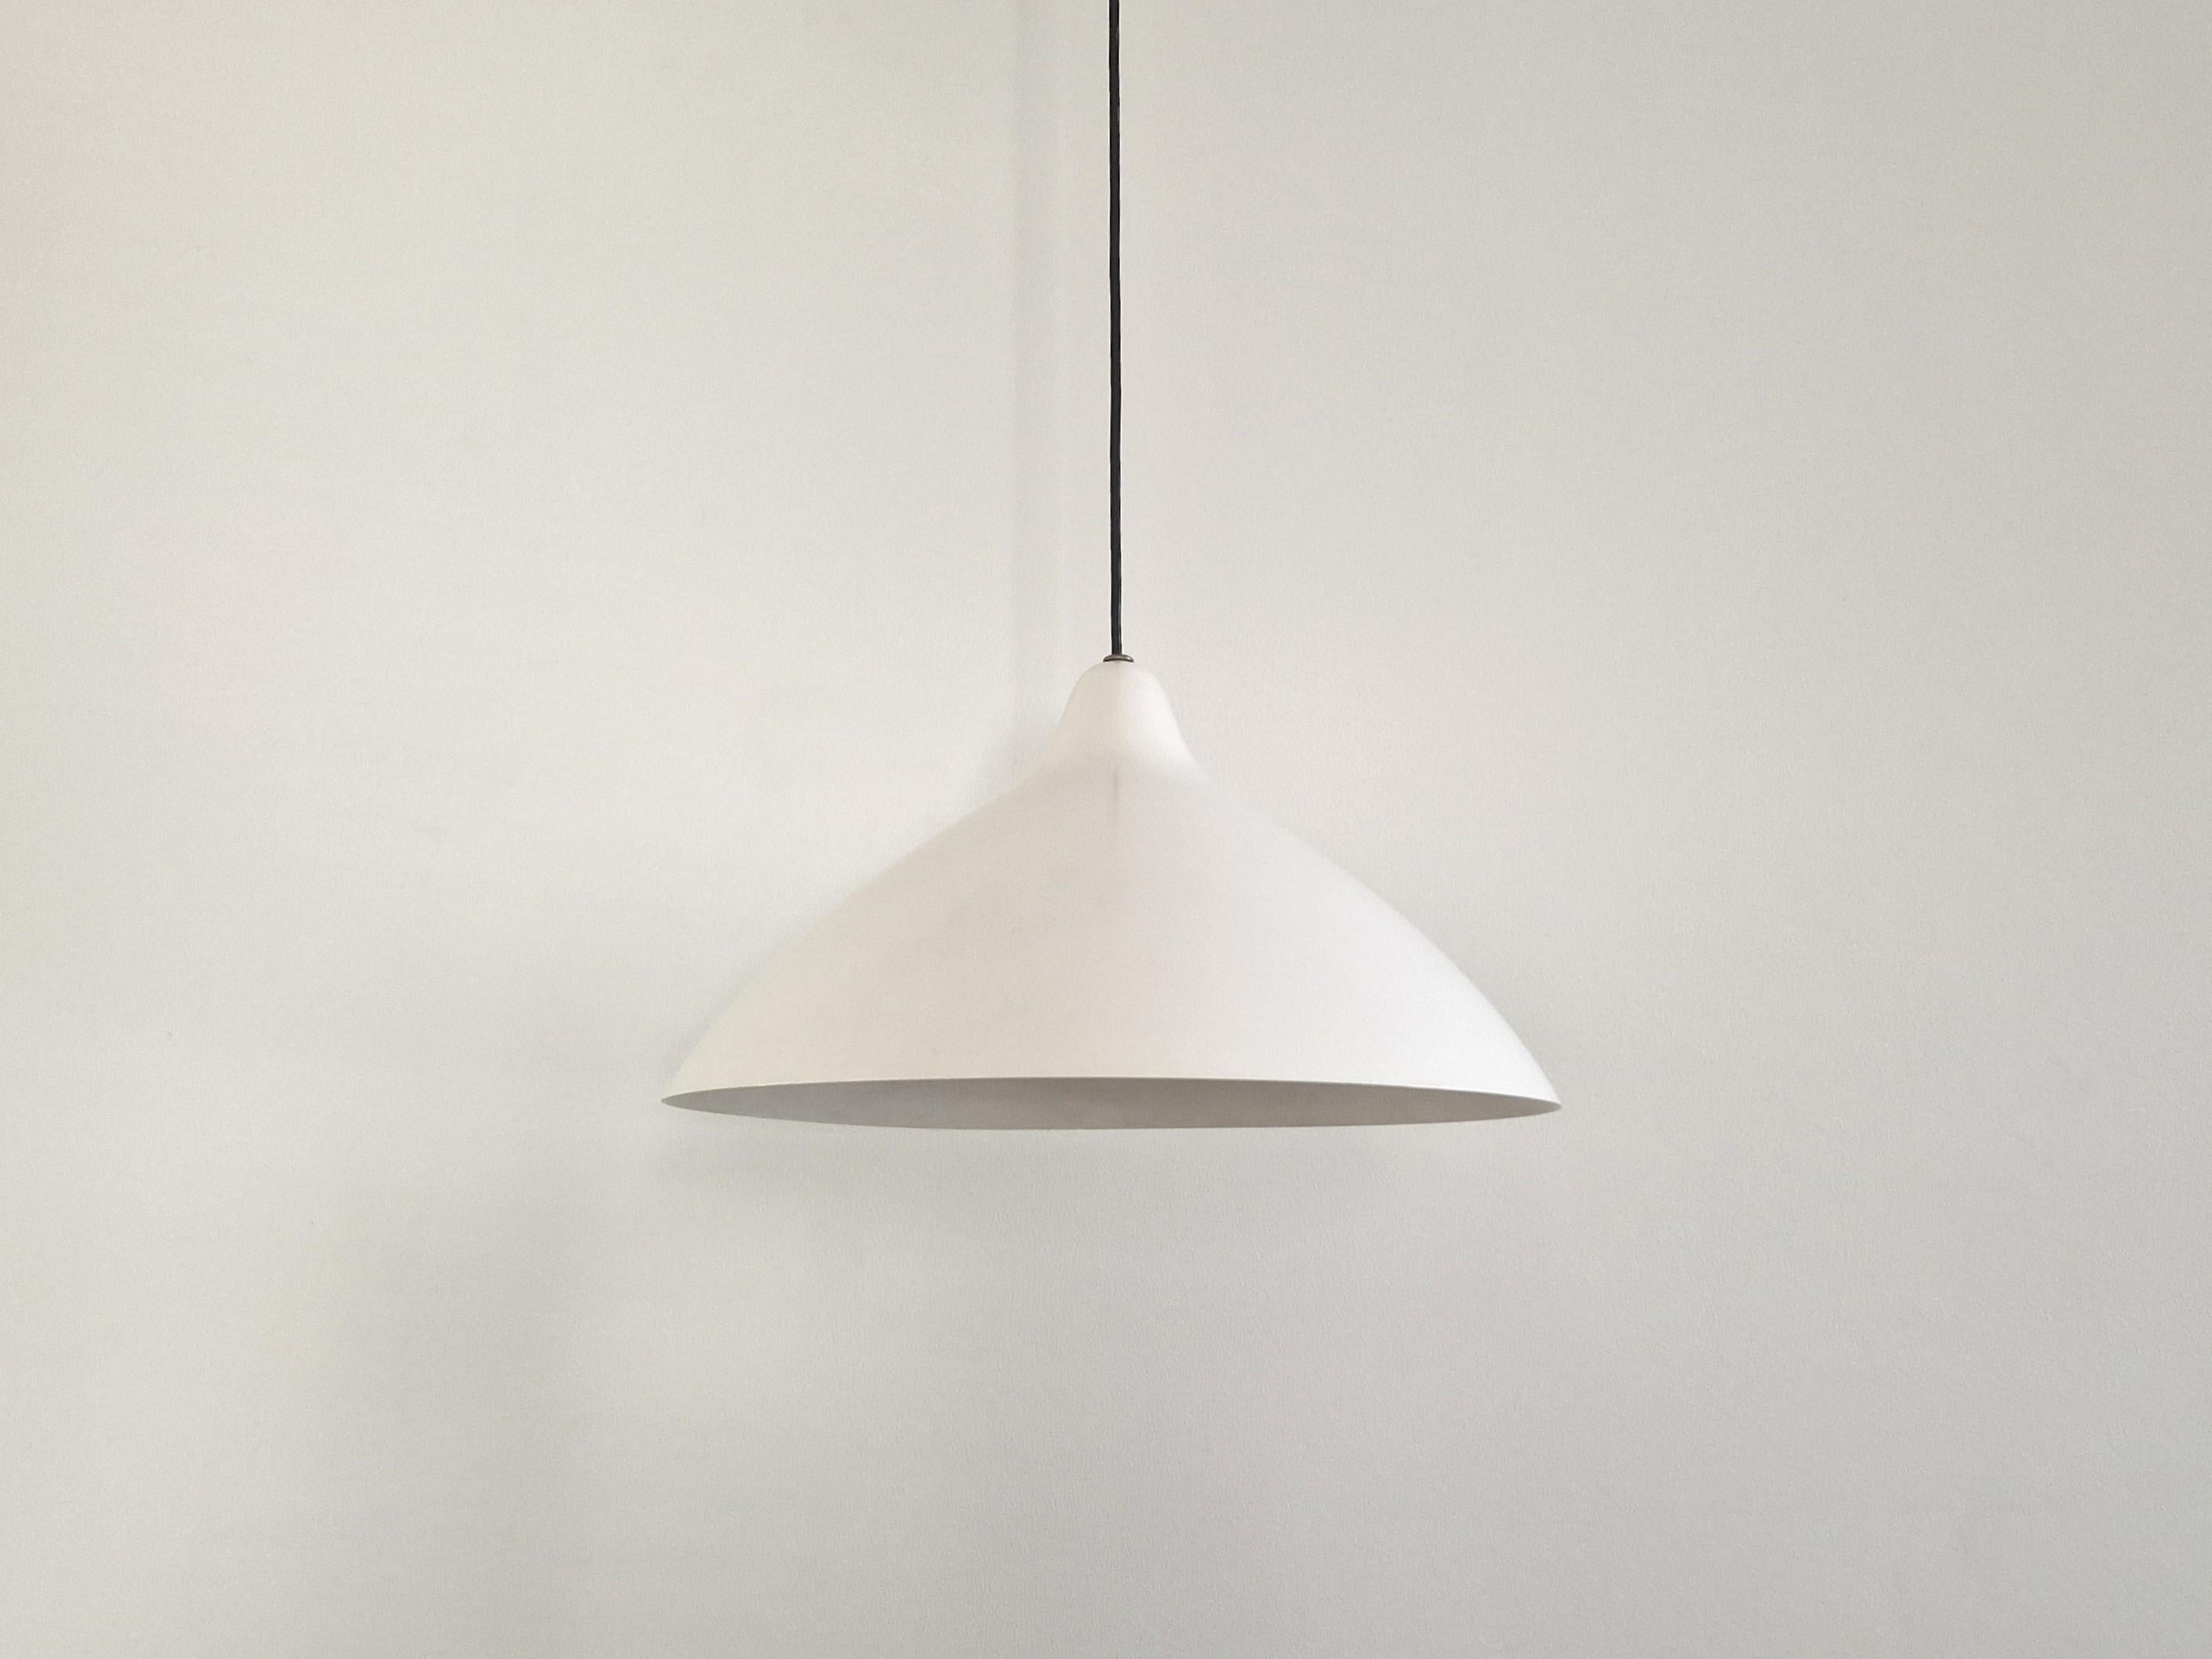 This is a beautiful organic design by Lisa Johansson-Pape for the Finnish lighting company Stockmann-Orno. This particular one is a white version in a good and original vintage condition with some minor signs of age and use. No dents or